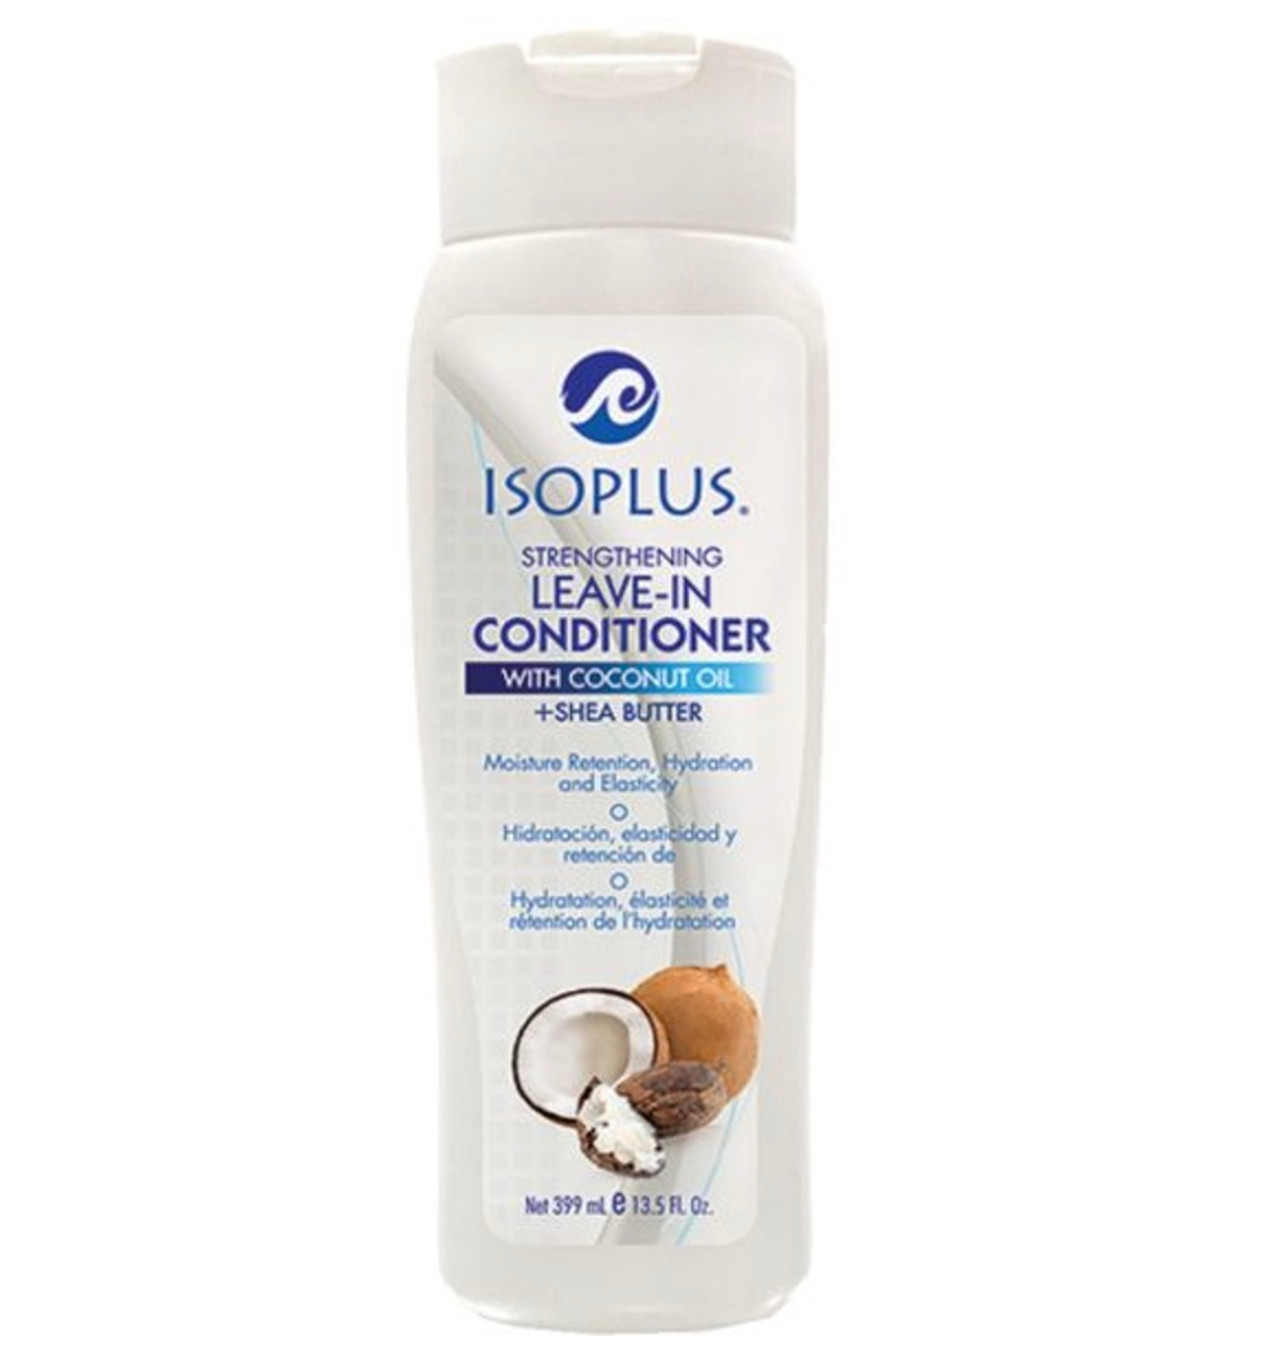 ISOPLUS Coconut Shea Butter Strengthening Leave-In Conditioner